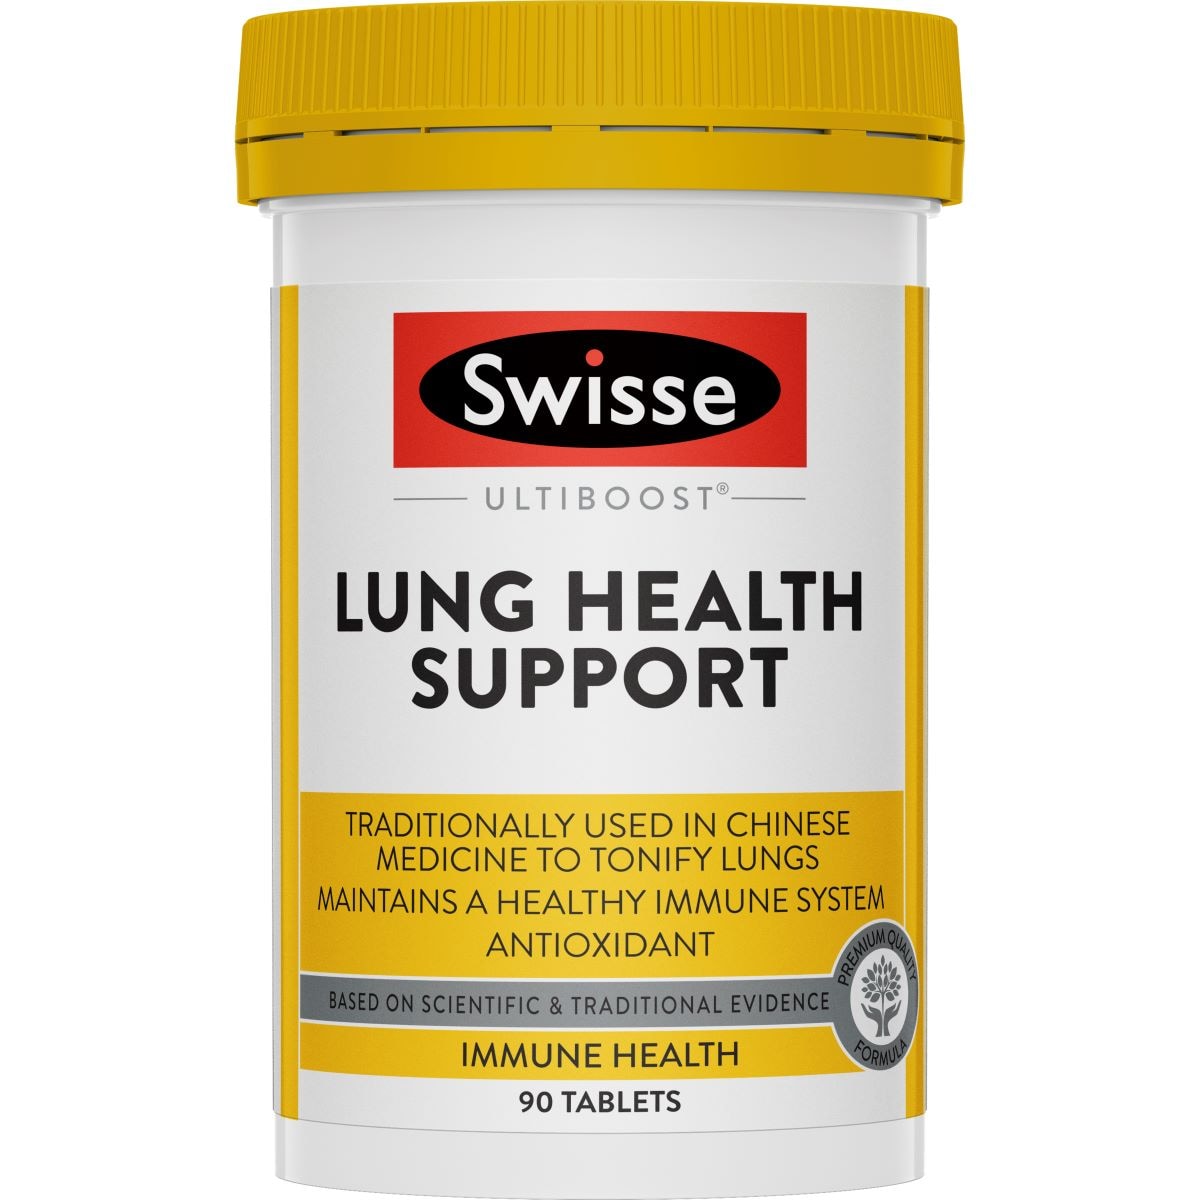 Swisse Ultiboost Lung Health Support 90 Tablets